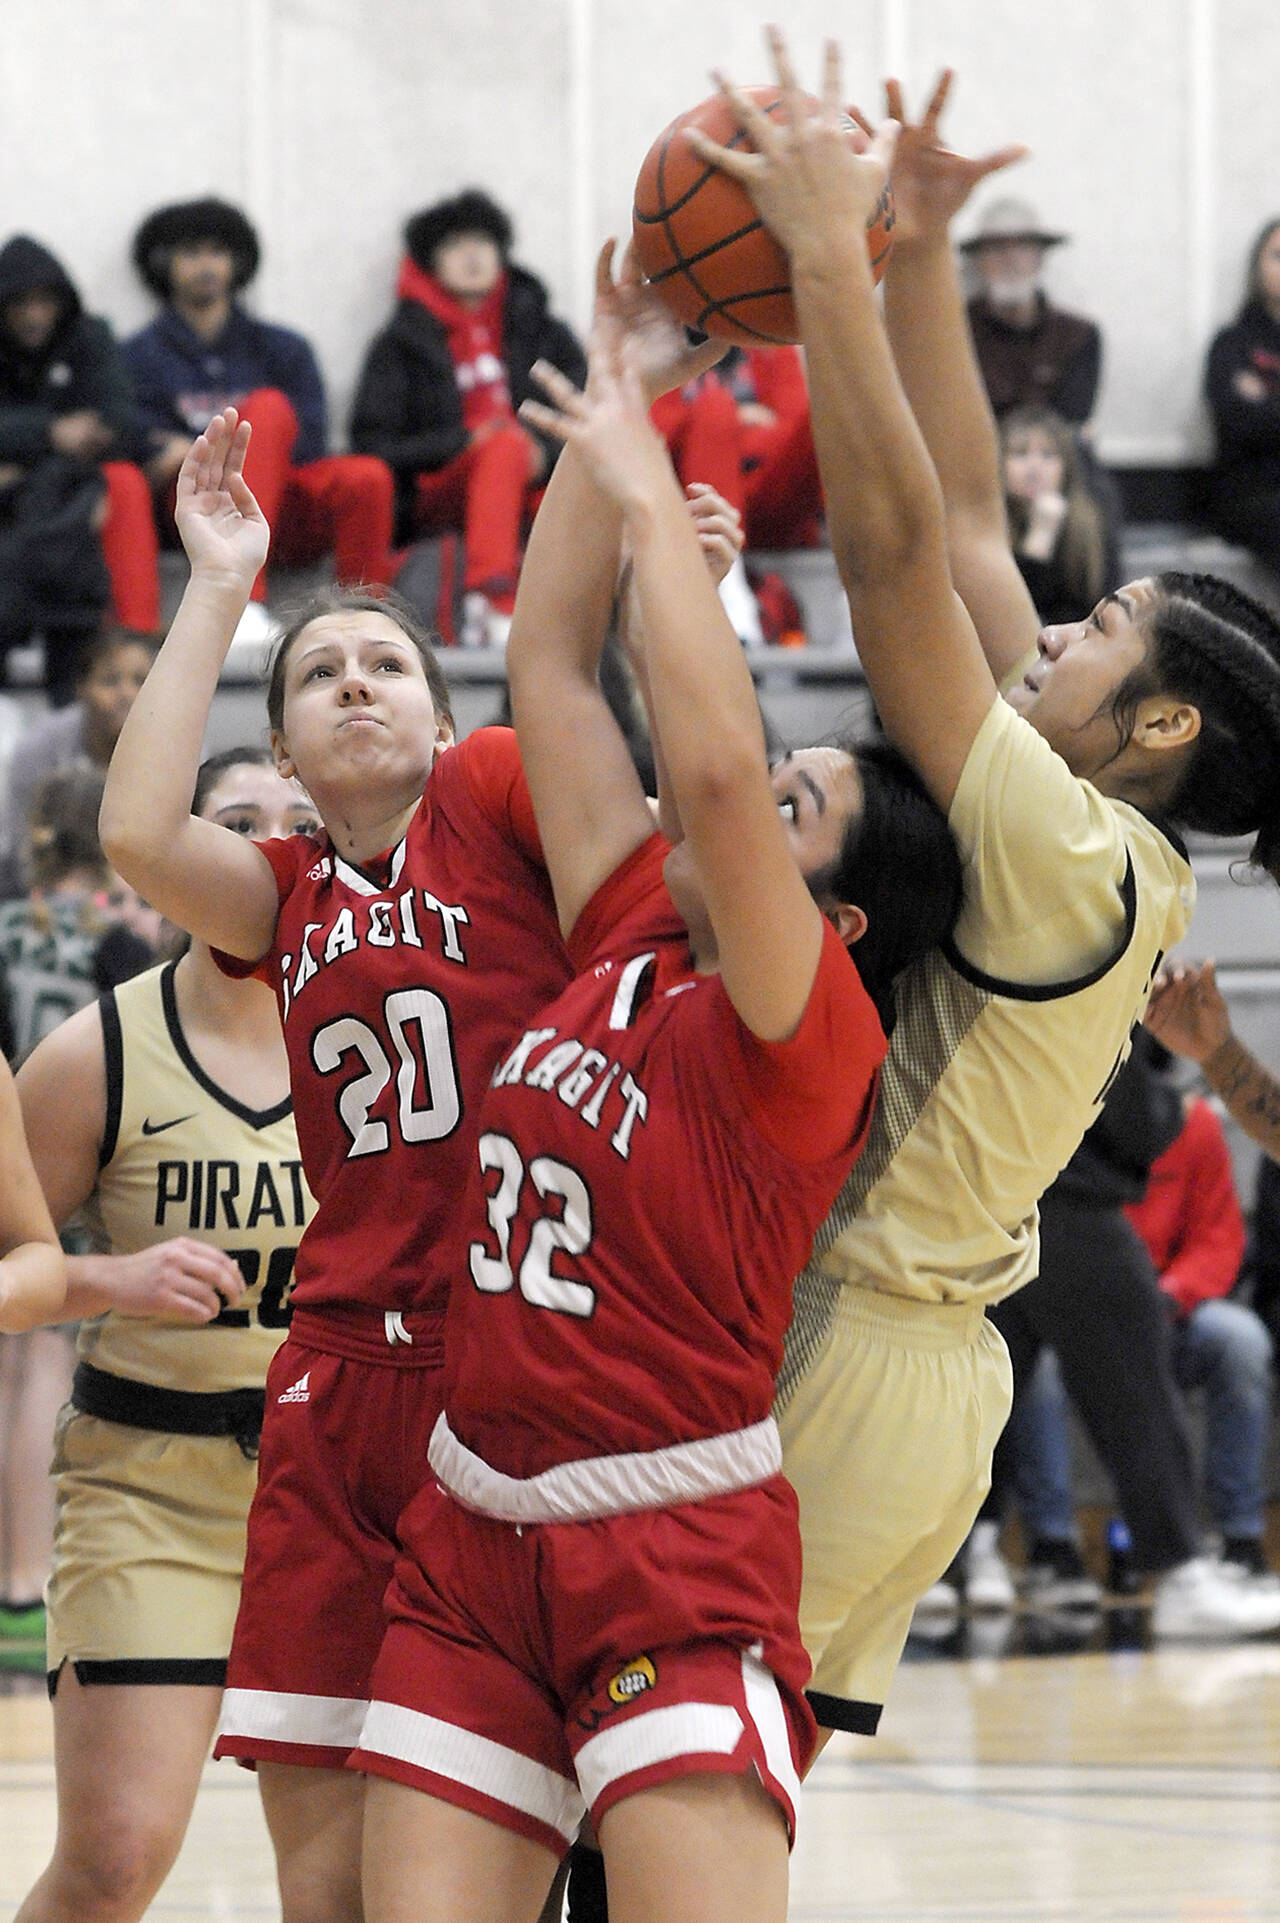 KEITH THORPE/PENINSULA DAILY NEWS
Peninsula's Ituau Tuisaula, right, reaches for a rebound over the heads of Skagit Valley's McKenna Wichers, left, and Sarah Cook as Pennsula's Ruth Moss looks on from behind on Wednesday night in Port Angeles.